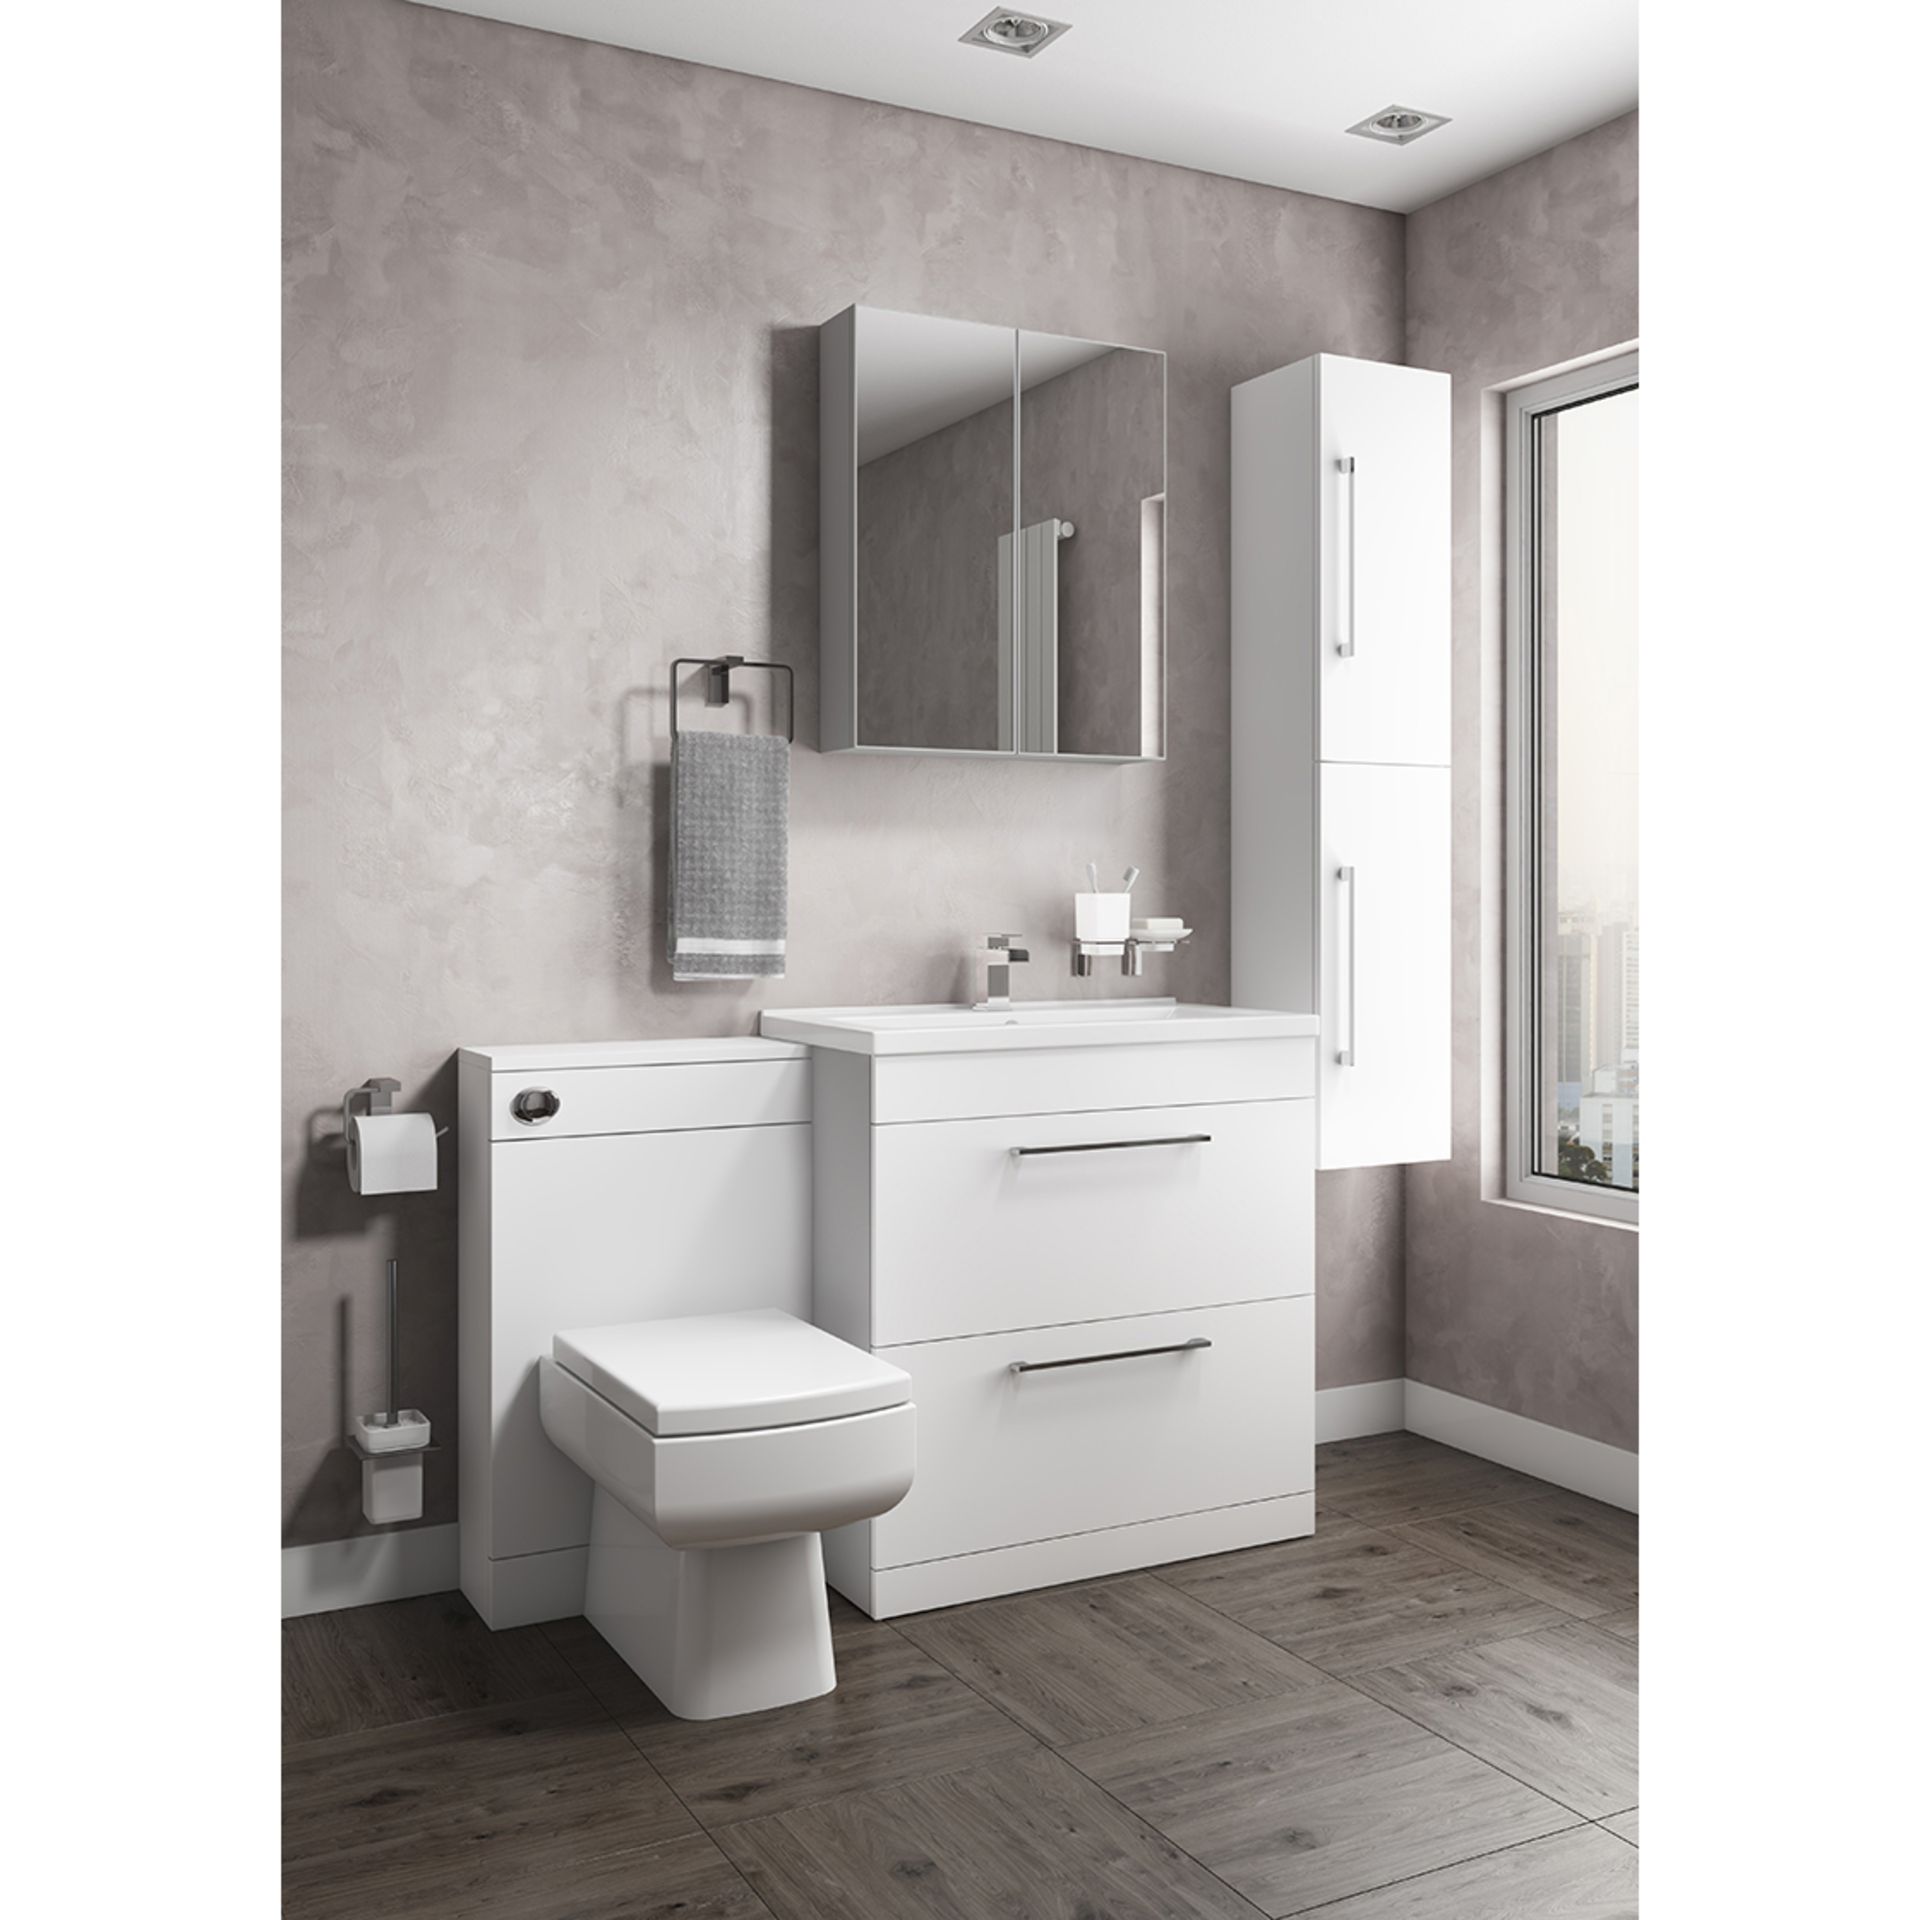 New (T140) Belle And Fresco Gloss White 600mm 2 Door Mirror Cabinet. RRP £277.55.